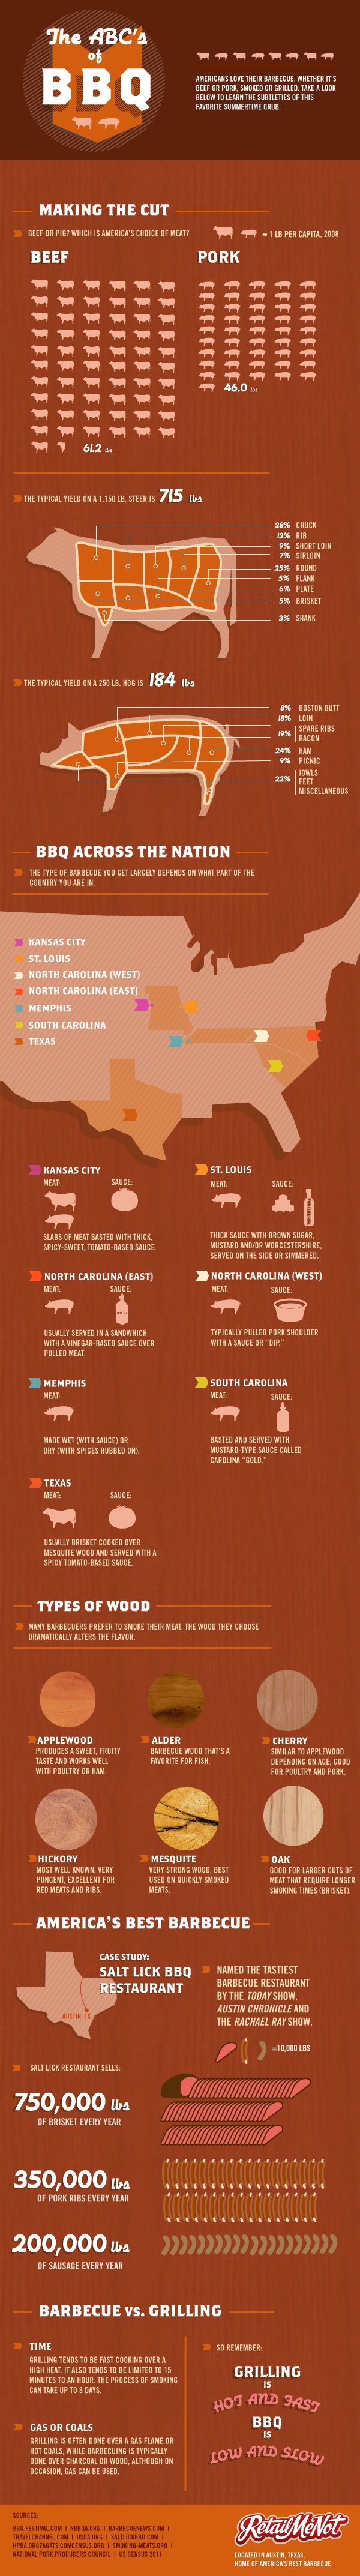 Guide to BBQ in the US